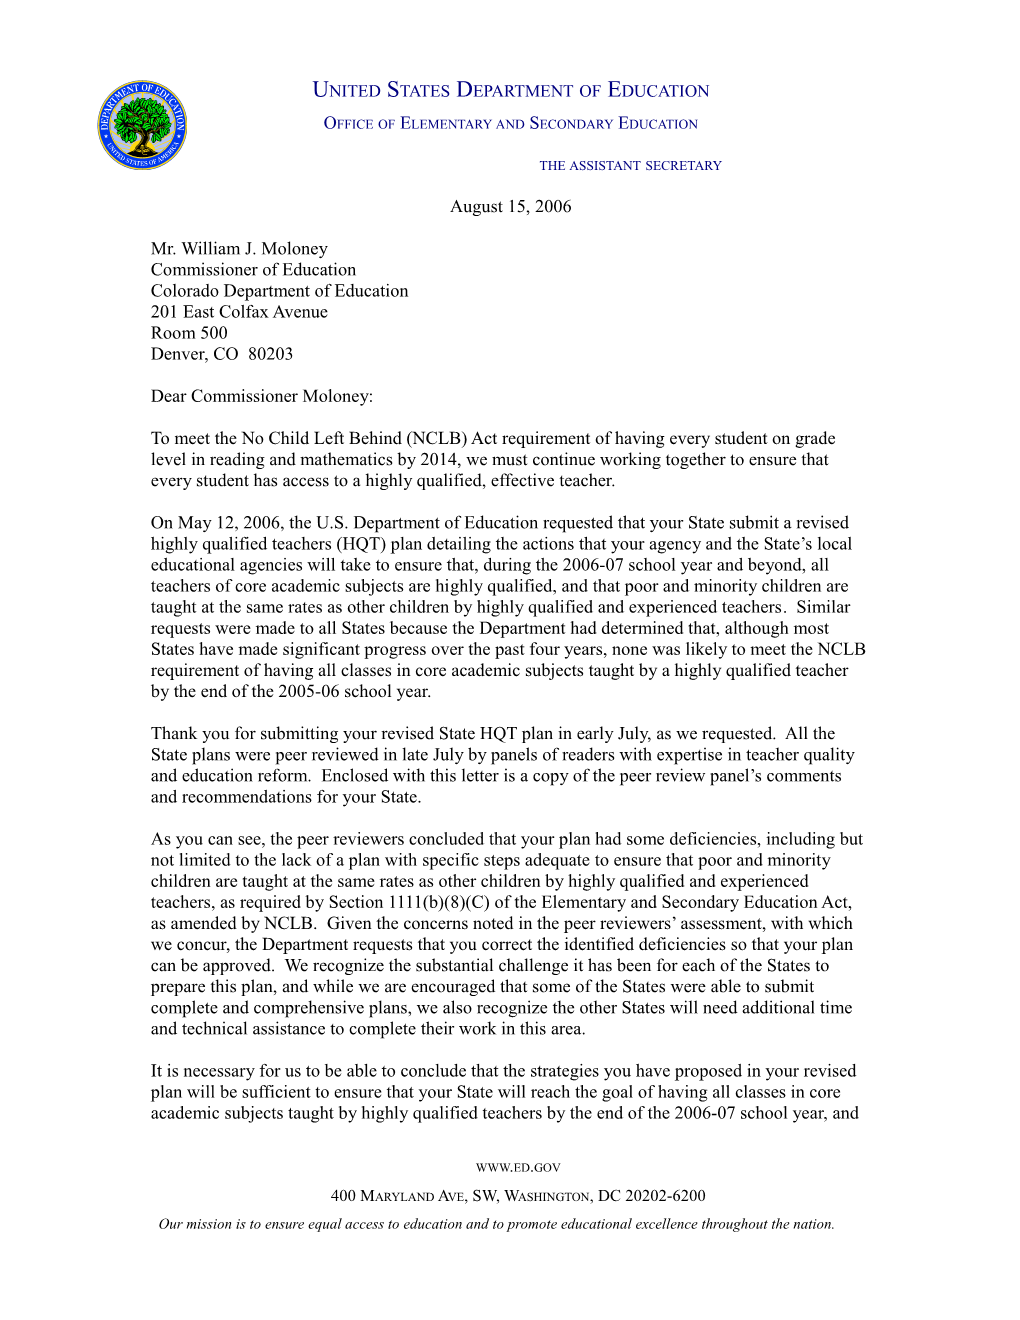 Colorado Letter to Chief State School Officer Regarding the Peer Review Comments of The